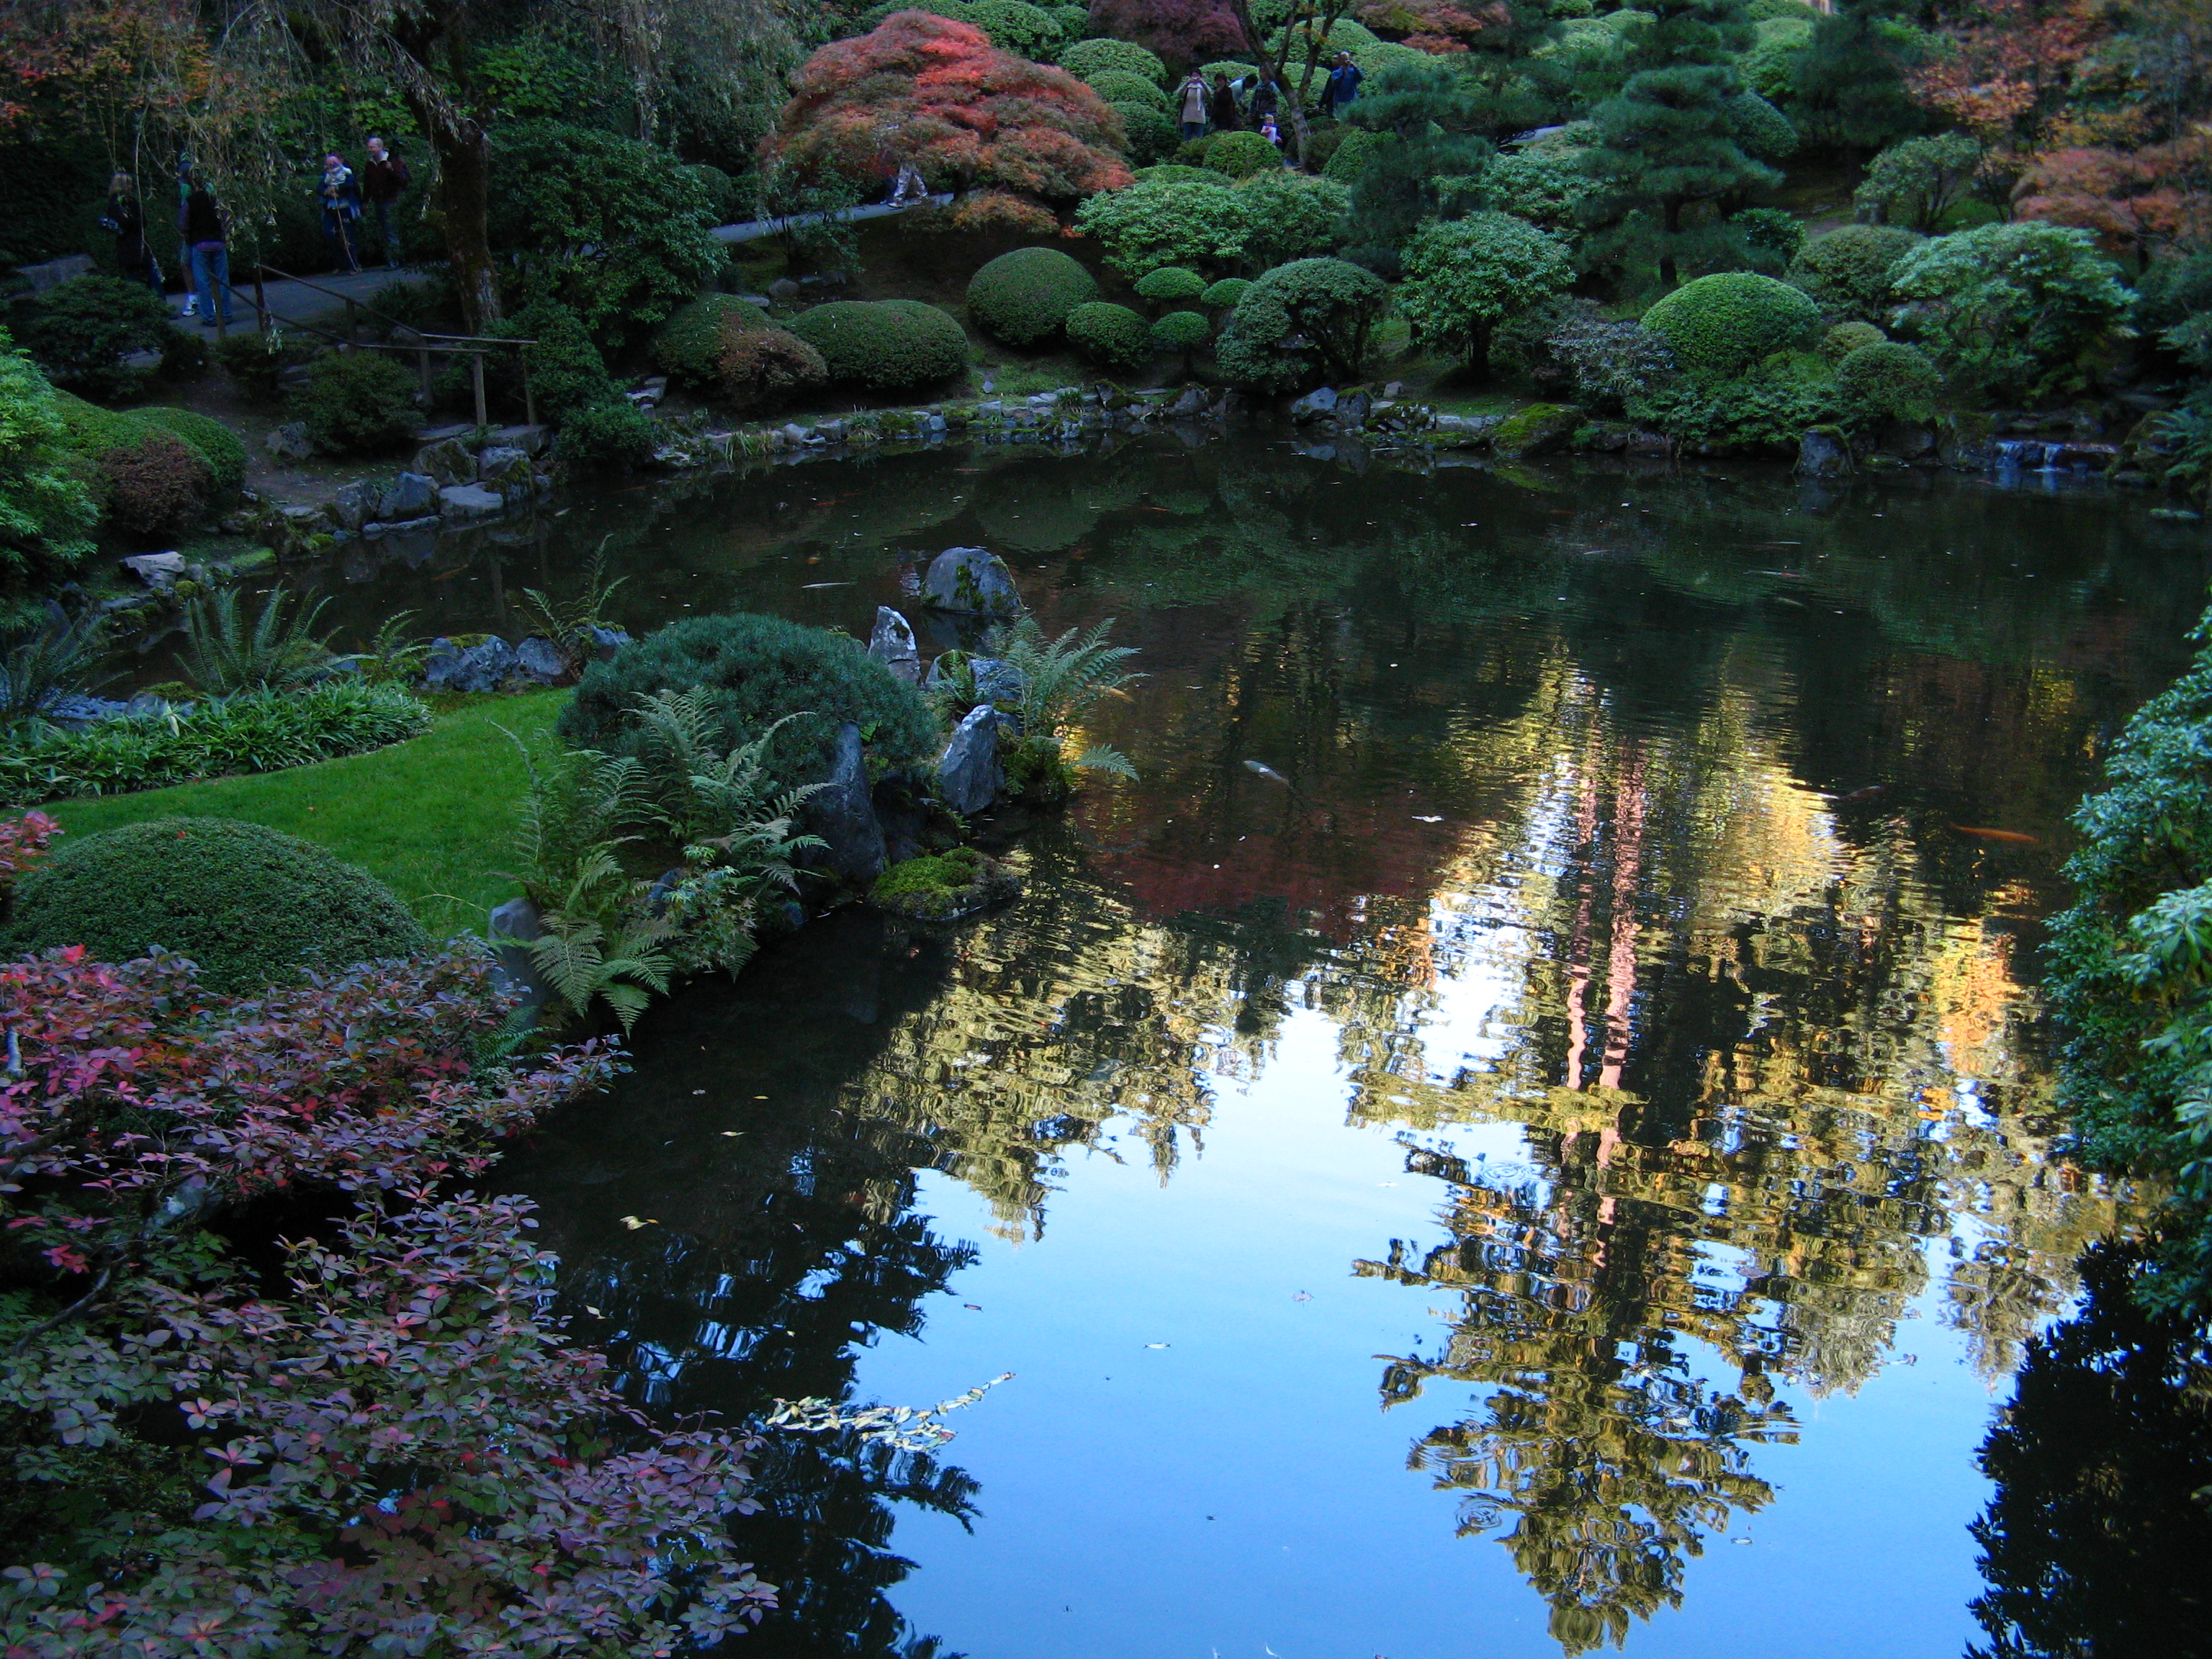 Pond, Trees, and Reflections